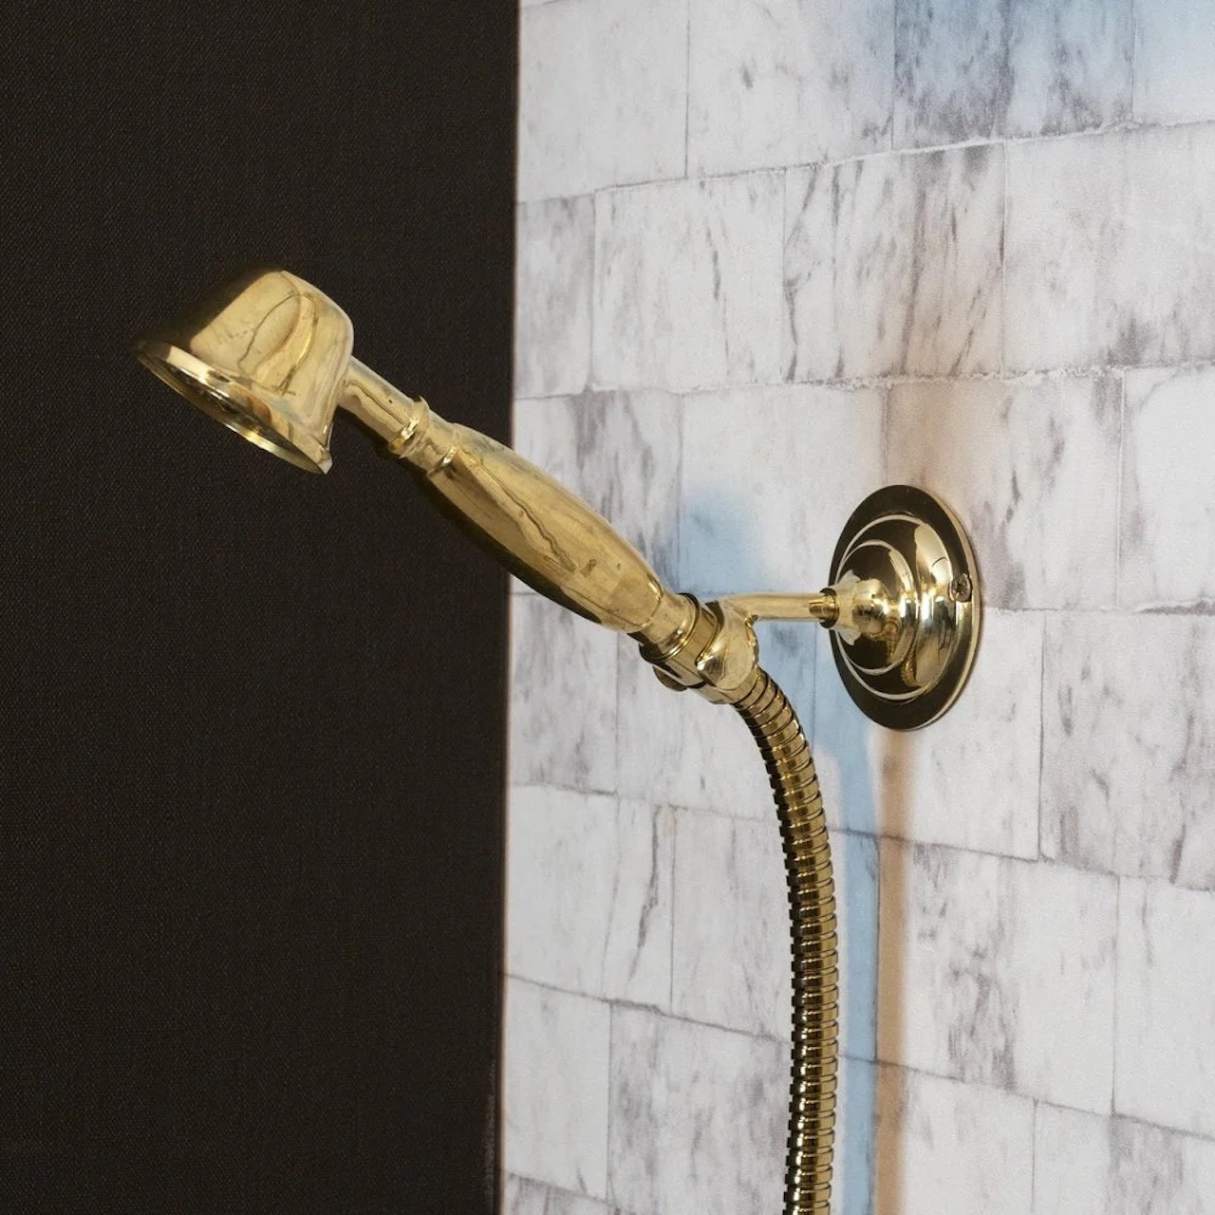 What Is The Highest Rated Brass Handheld Showerhead?